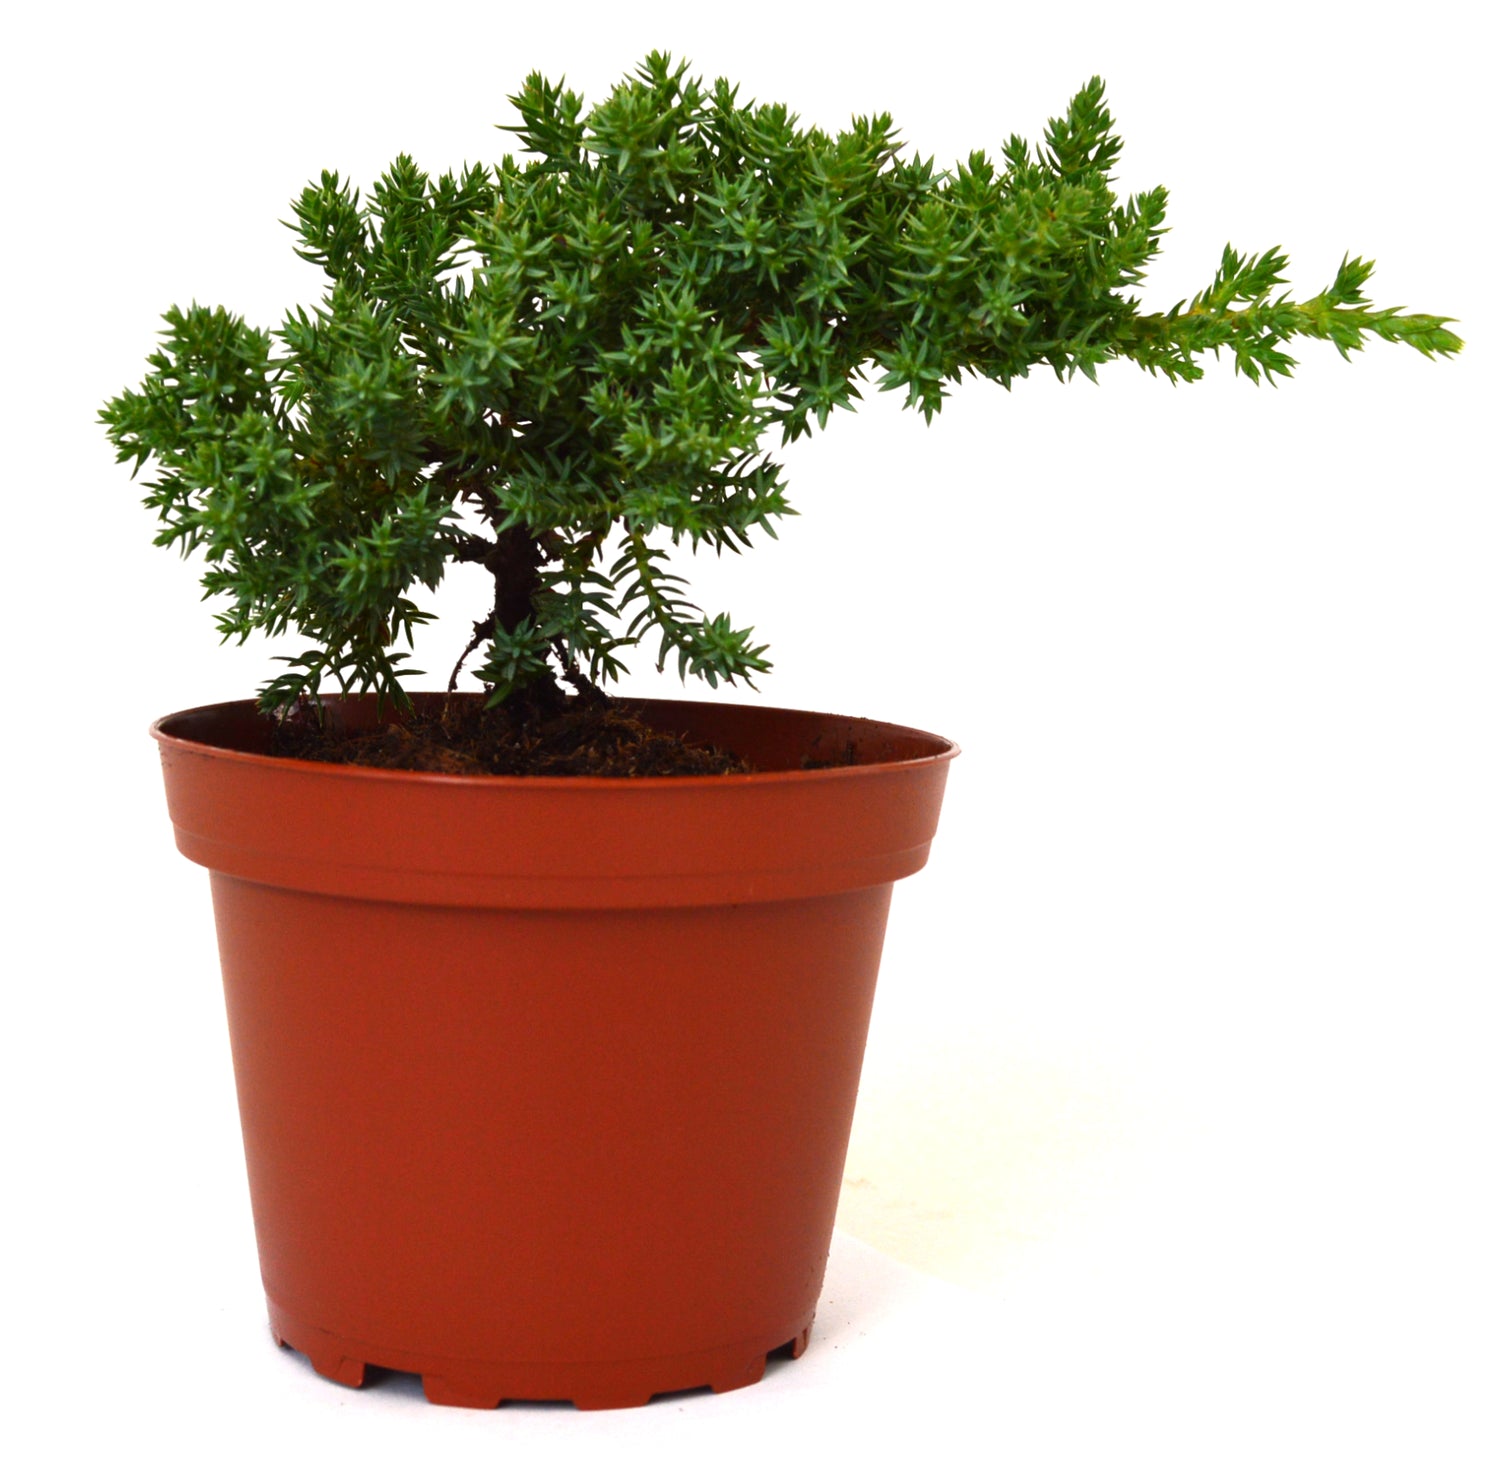 9Greenbox - Complete Juniper Bonsai Tree Starter Kit with Ceramic Vase and Water Tray - 9GreenBox